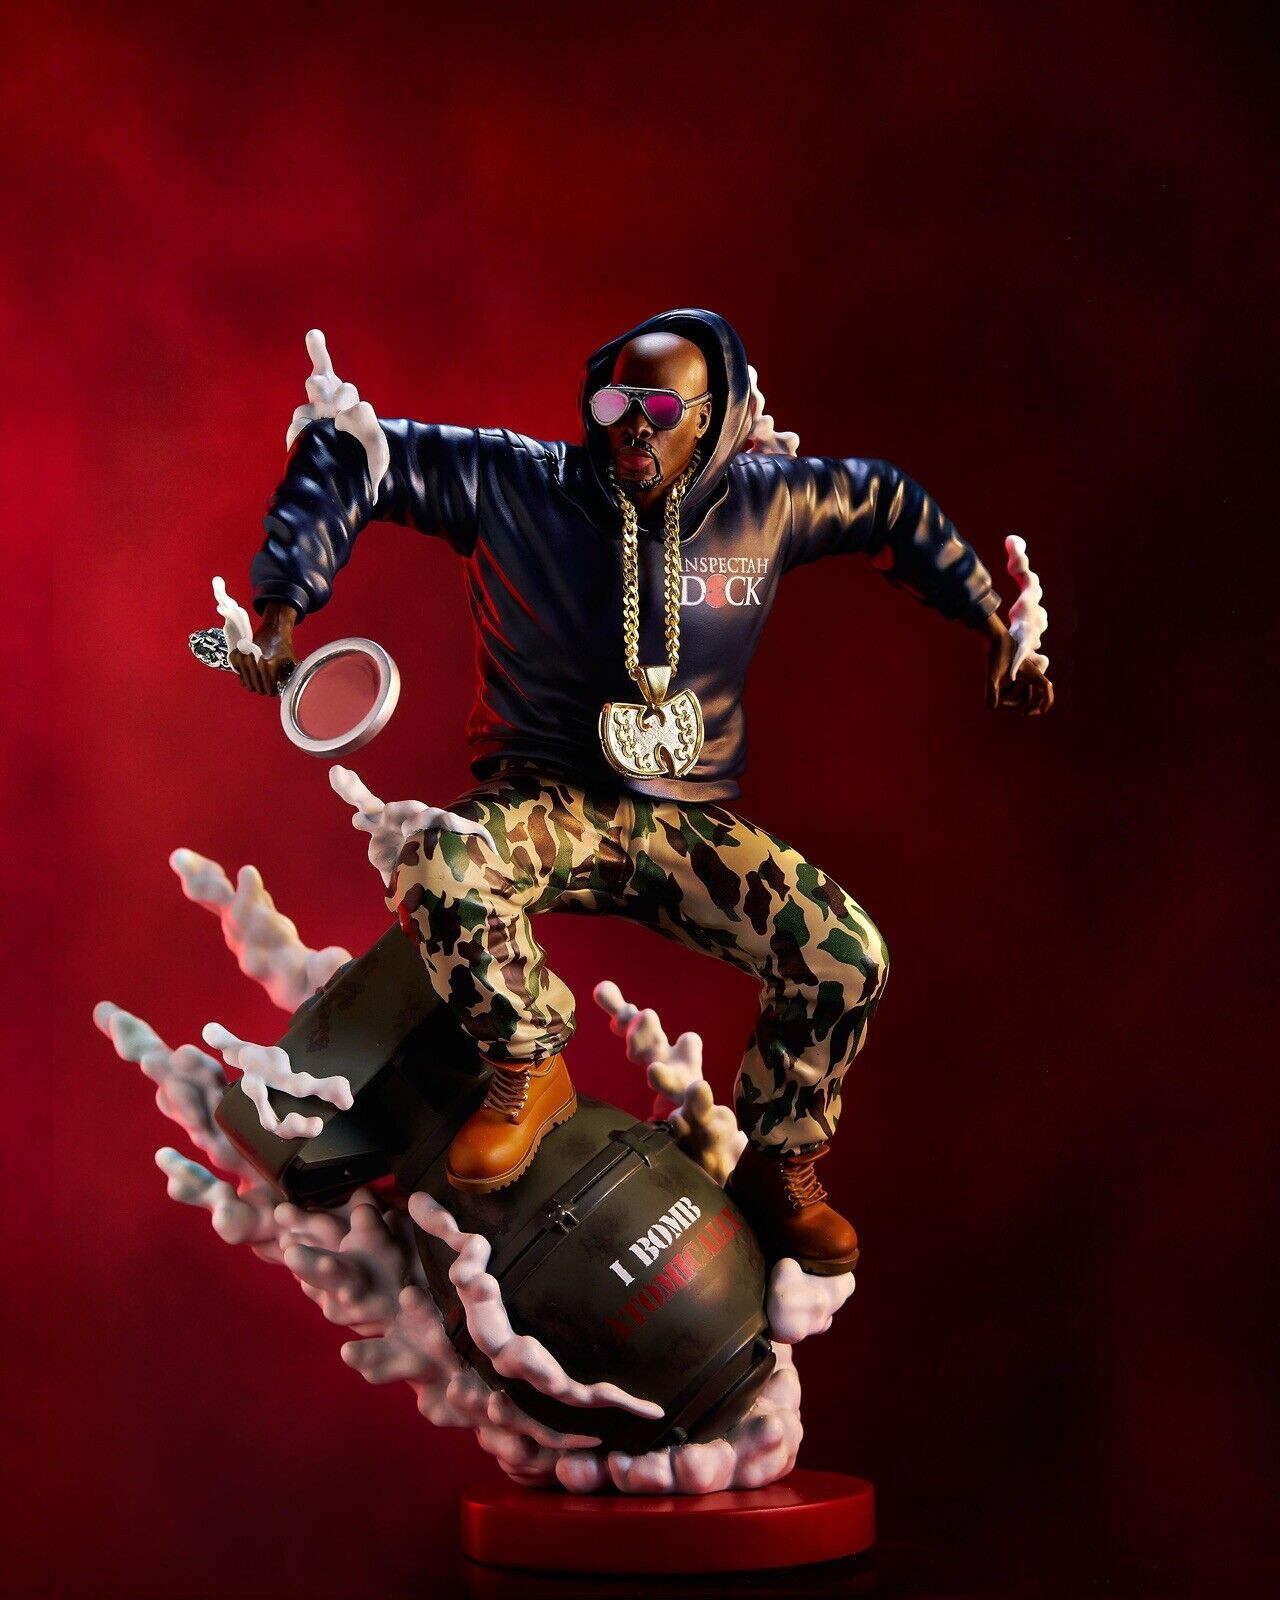 Concrete Jungle Inspectah Deck OG Collectible Statue Wu Tang Clan New Limited 